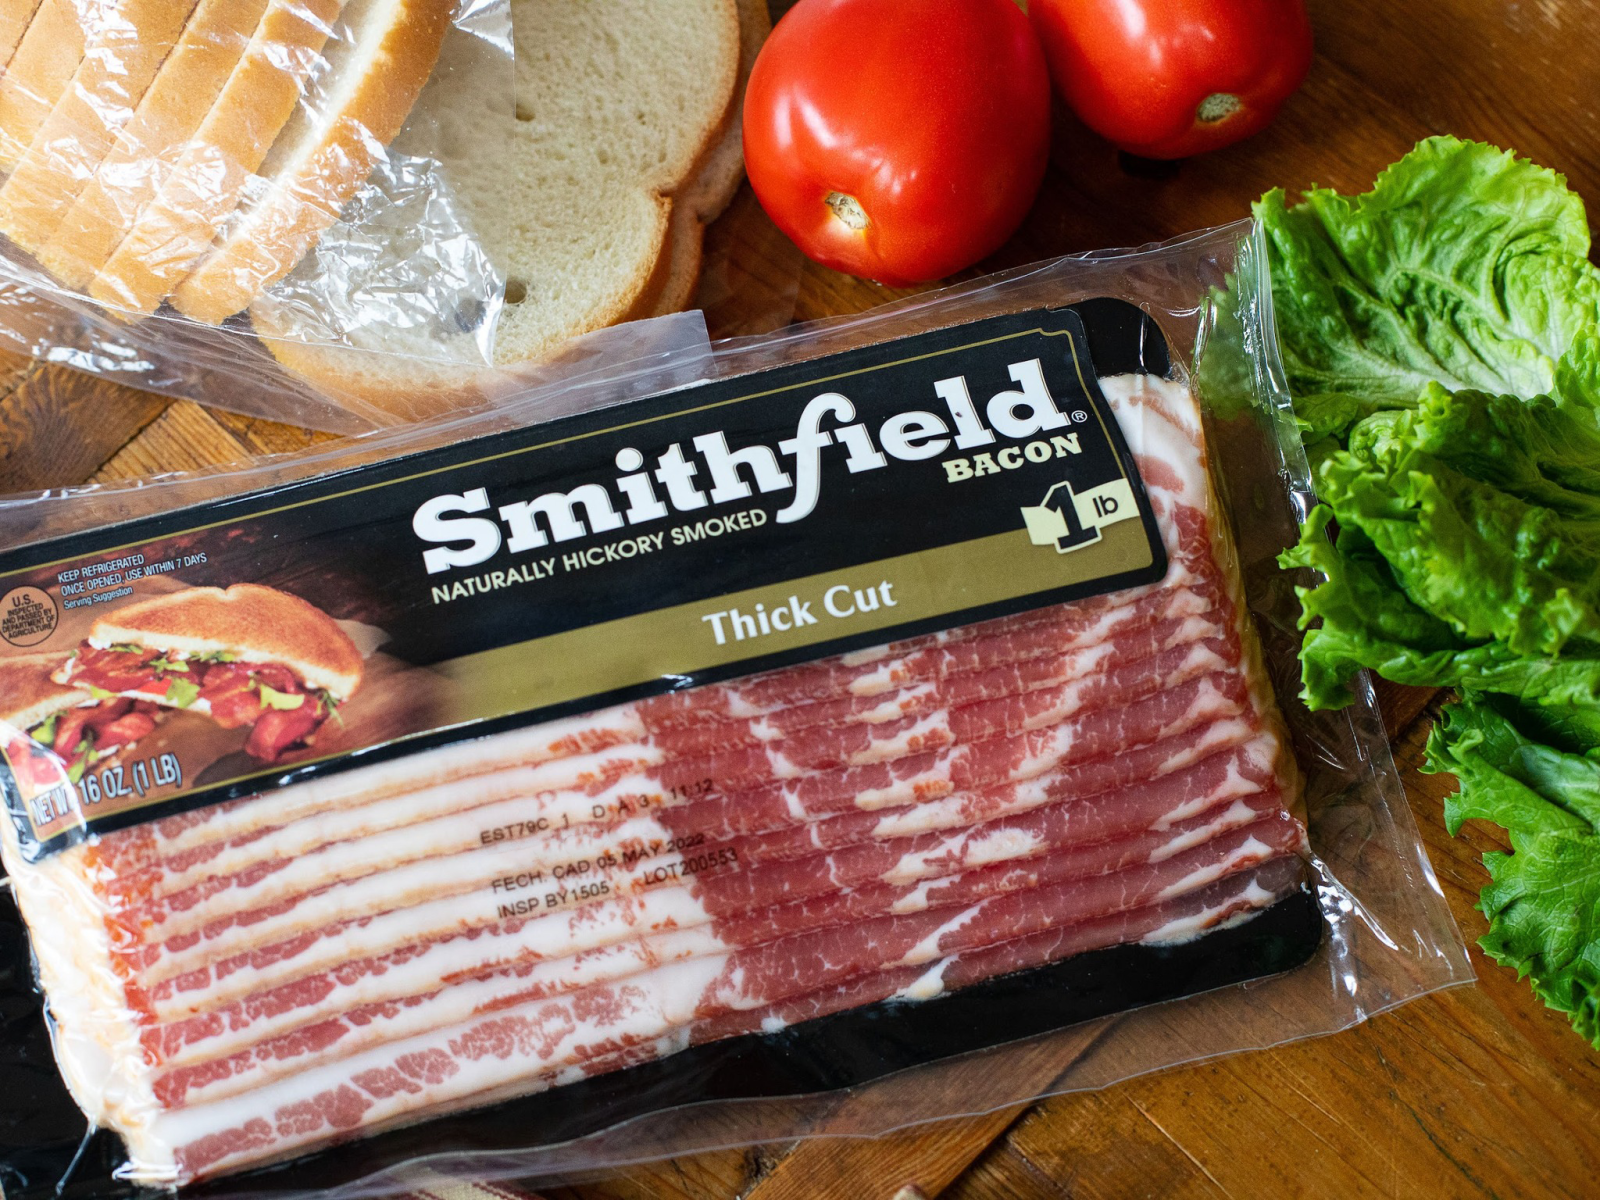 Get Smithfield Bacon As Low As $2.50 Per Pack At Publix – No Coupon Required!